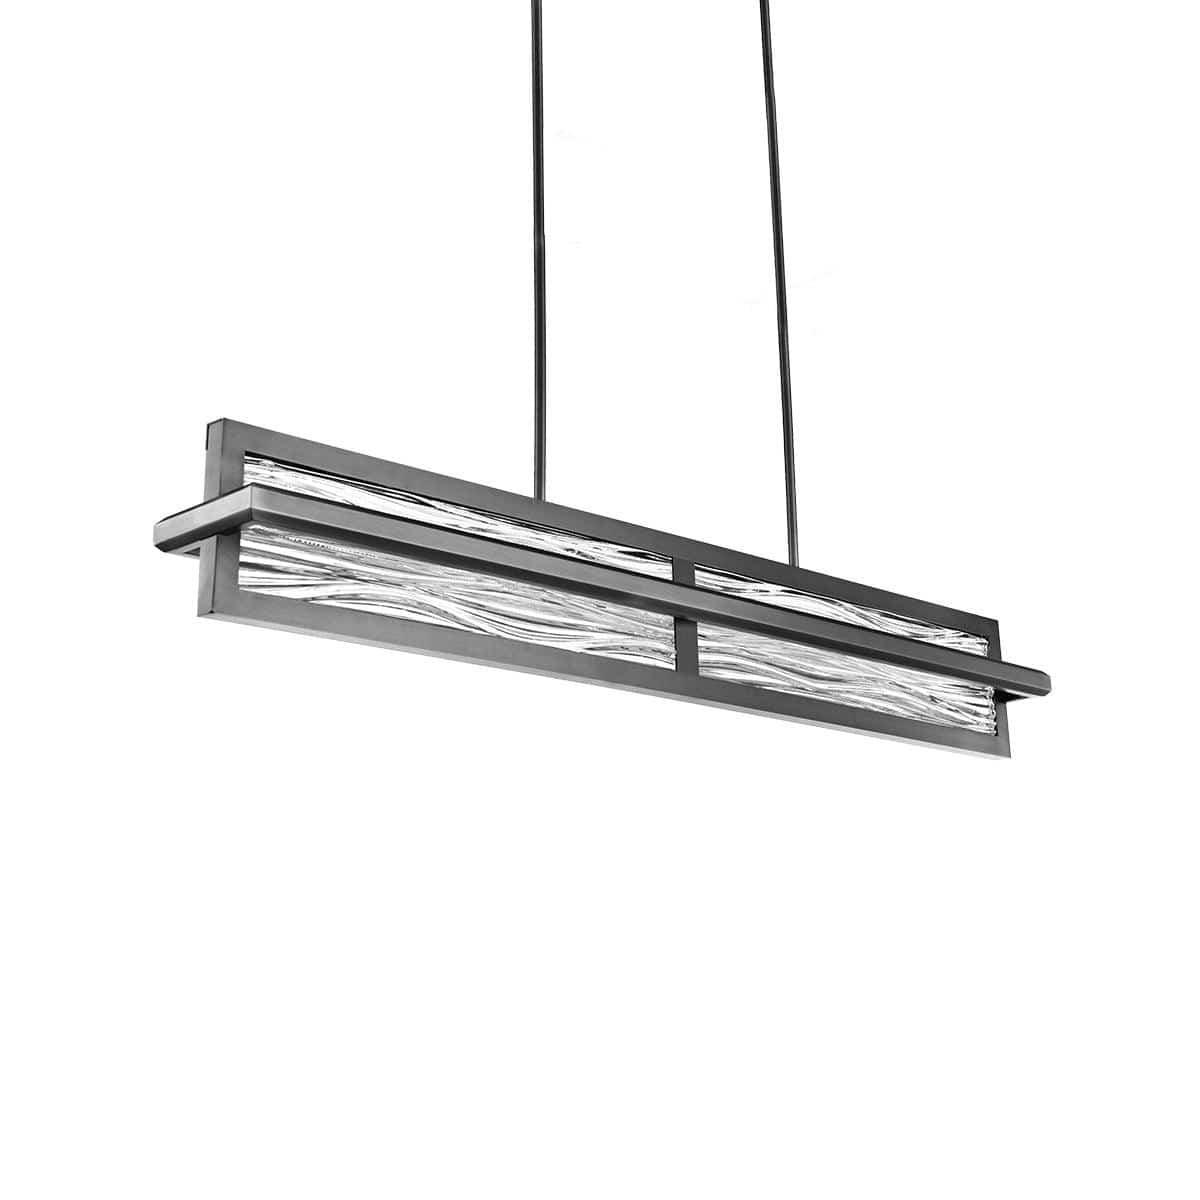 Montreal Lighting & Hardware - Atlantis LED Linear Pendant by Modern Forms | Open Box - PD-39947-AN-OB | Montreal Lighting & Hardware